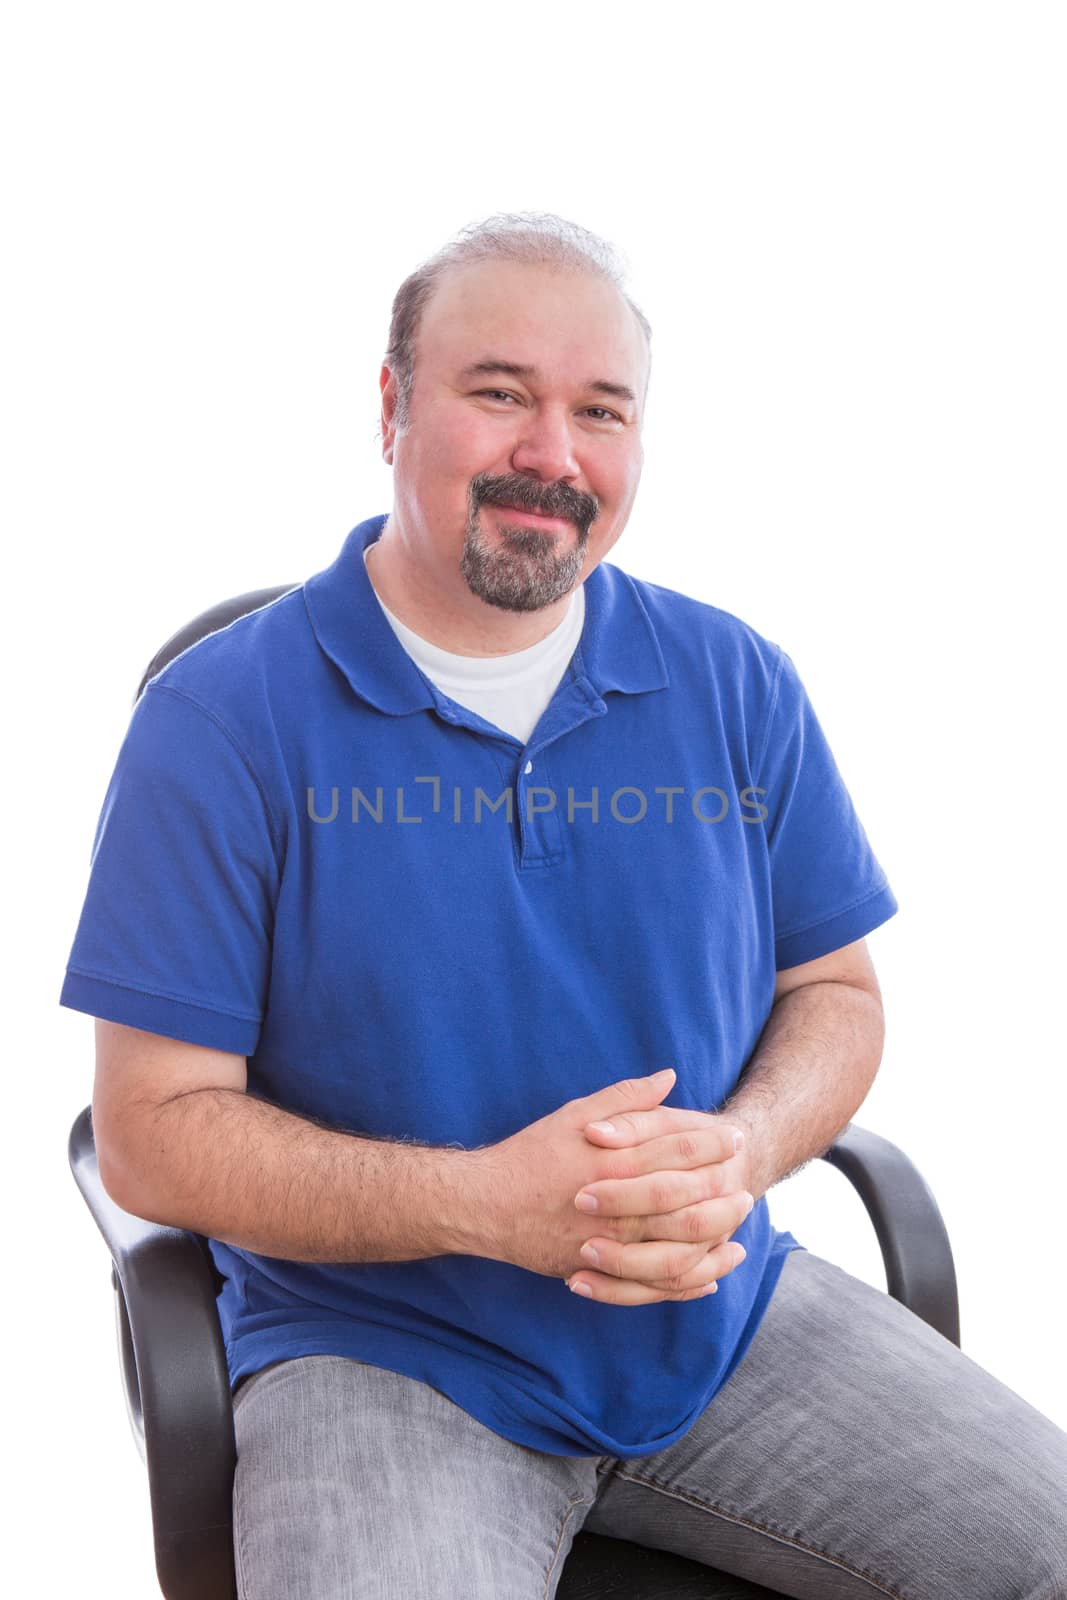 Close up Happy Bearded Adult Man in Blue Shirt Sitting on a Single Chair with Hands Crossed Over her Belly, Looking at the Camera with Admiration. Isolated on White Background.